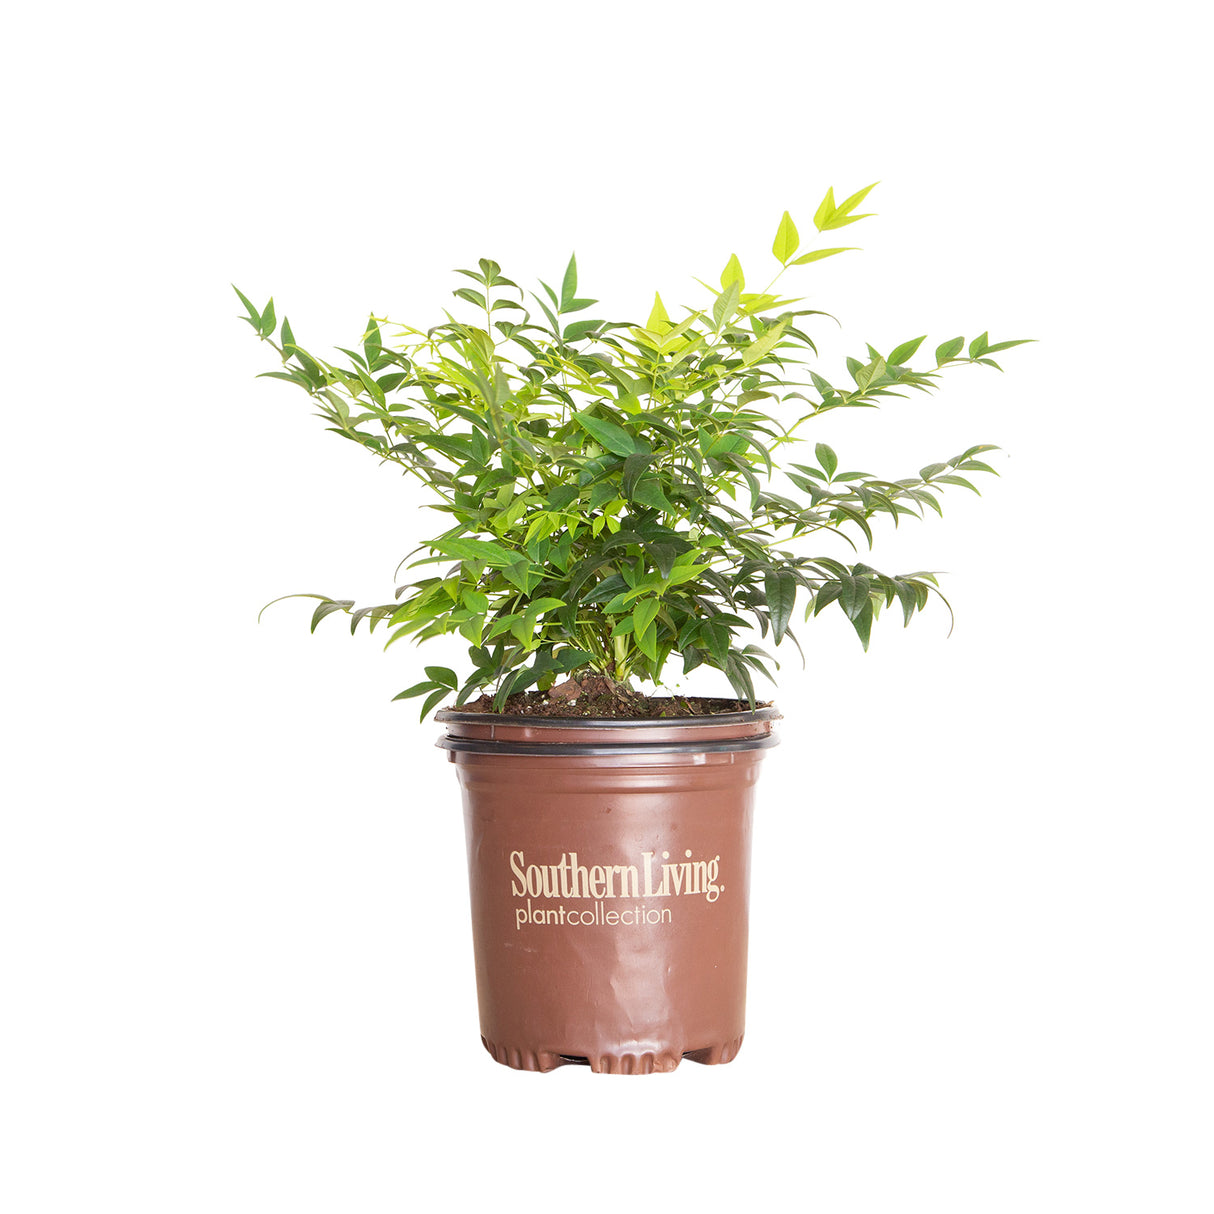 1 Gallon Lemon Lime Nandina with green foliage in a brown Southern Living Plant Collection pot on a white background